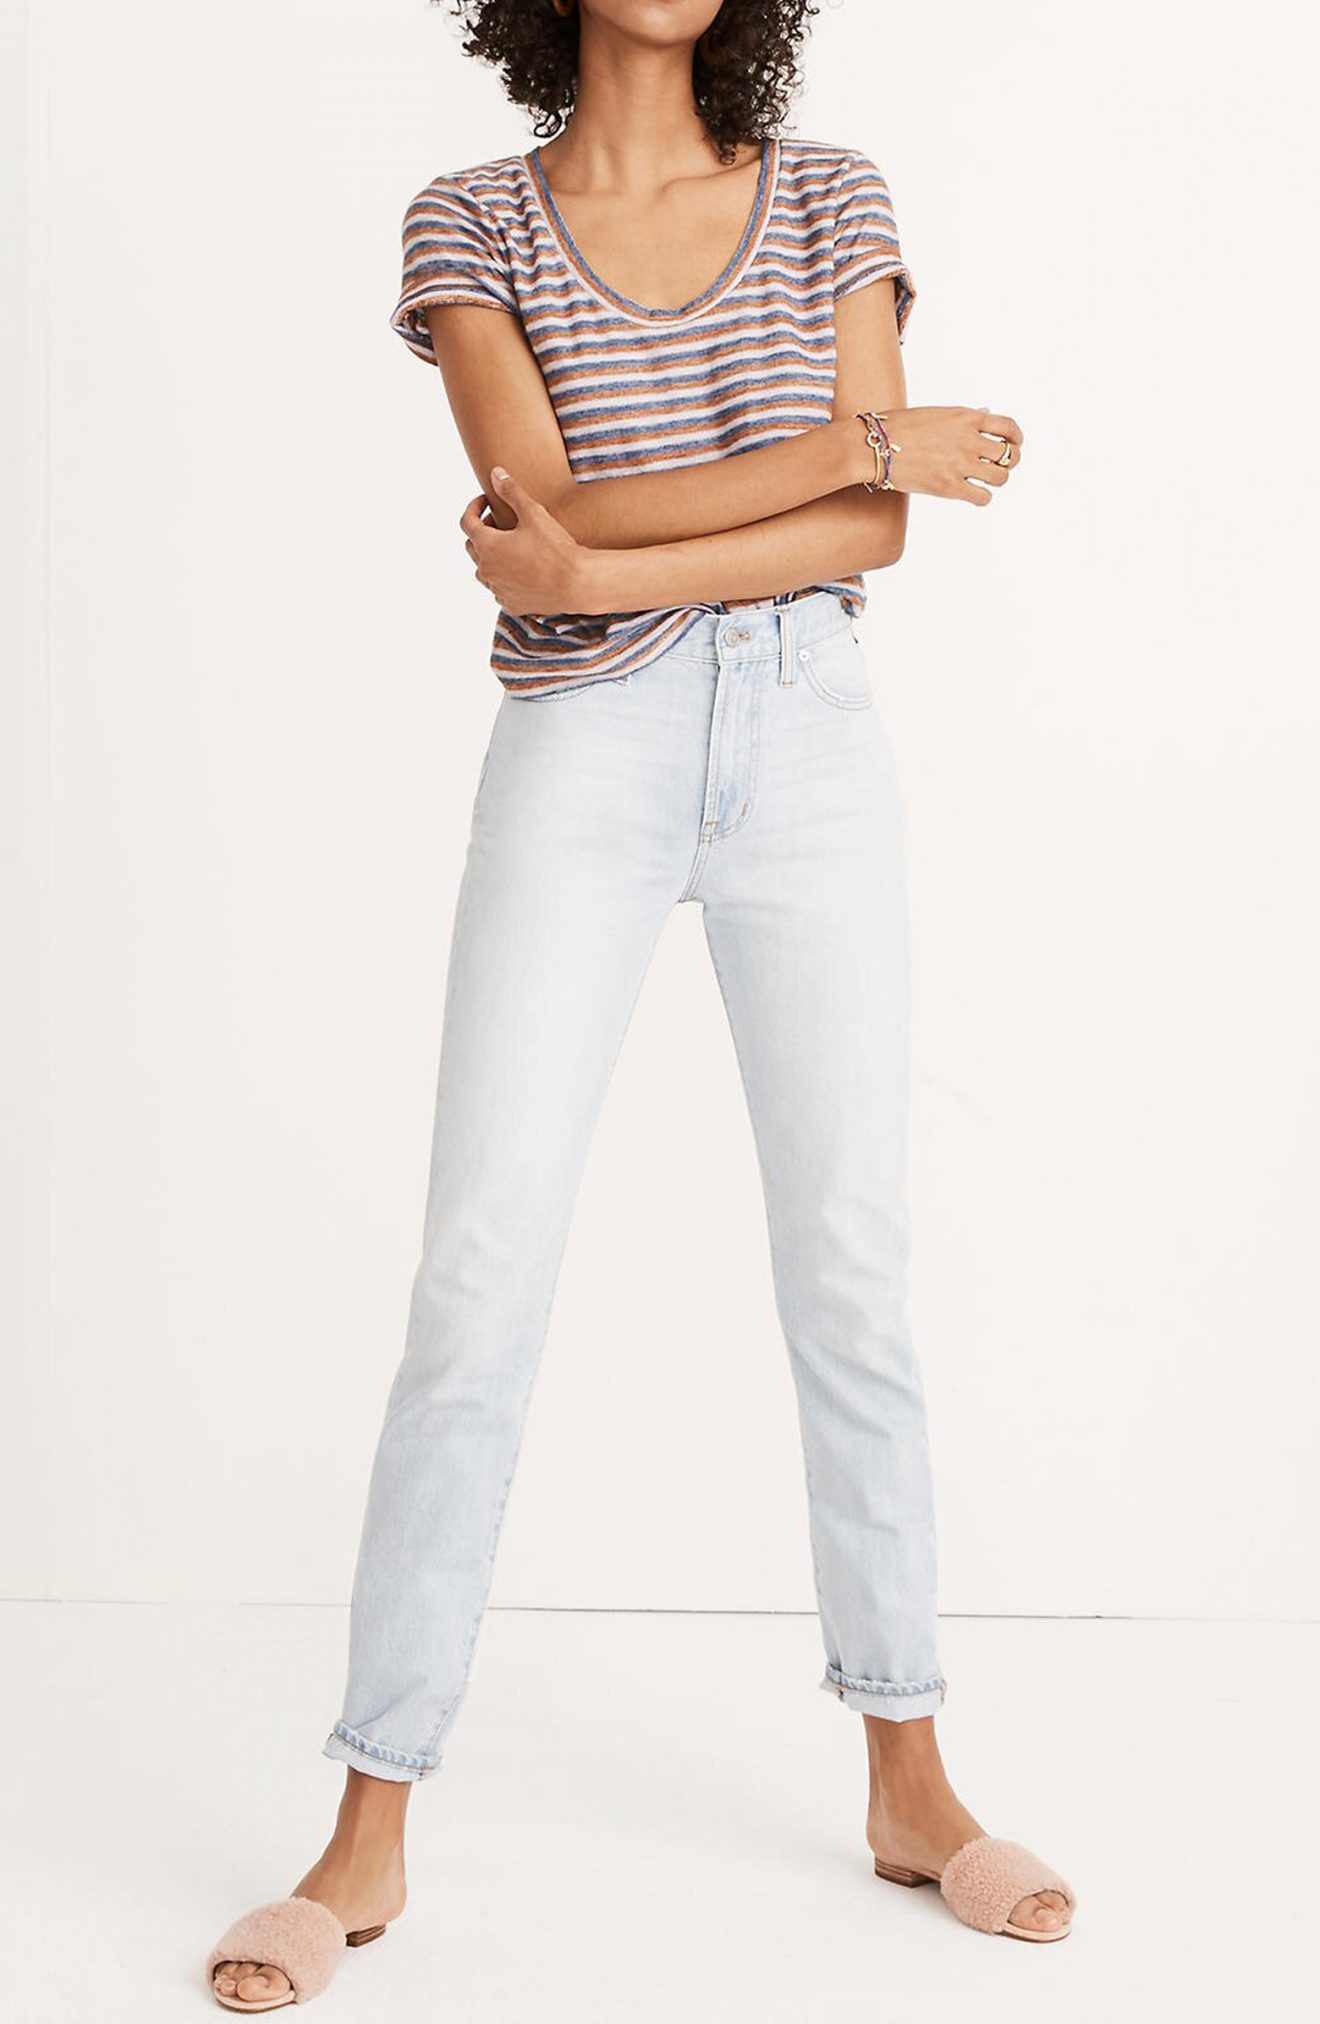 Madewell The Perfect Vintage Jean in Fitzgerald Wash